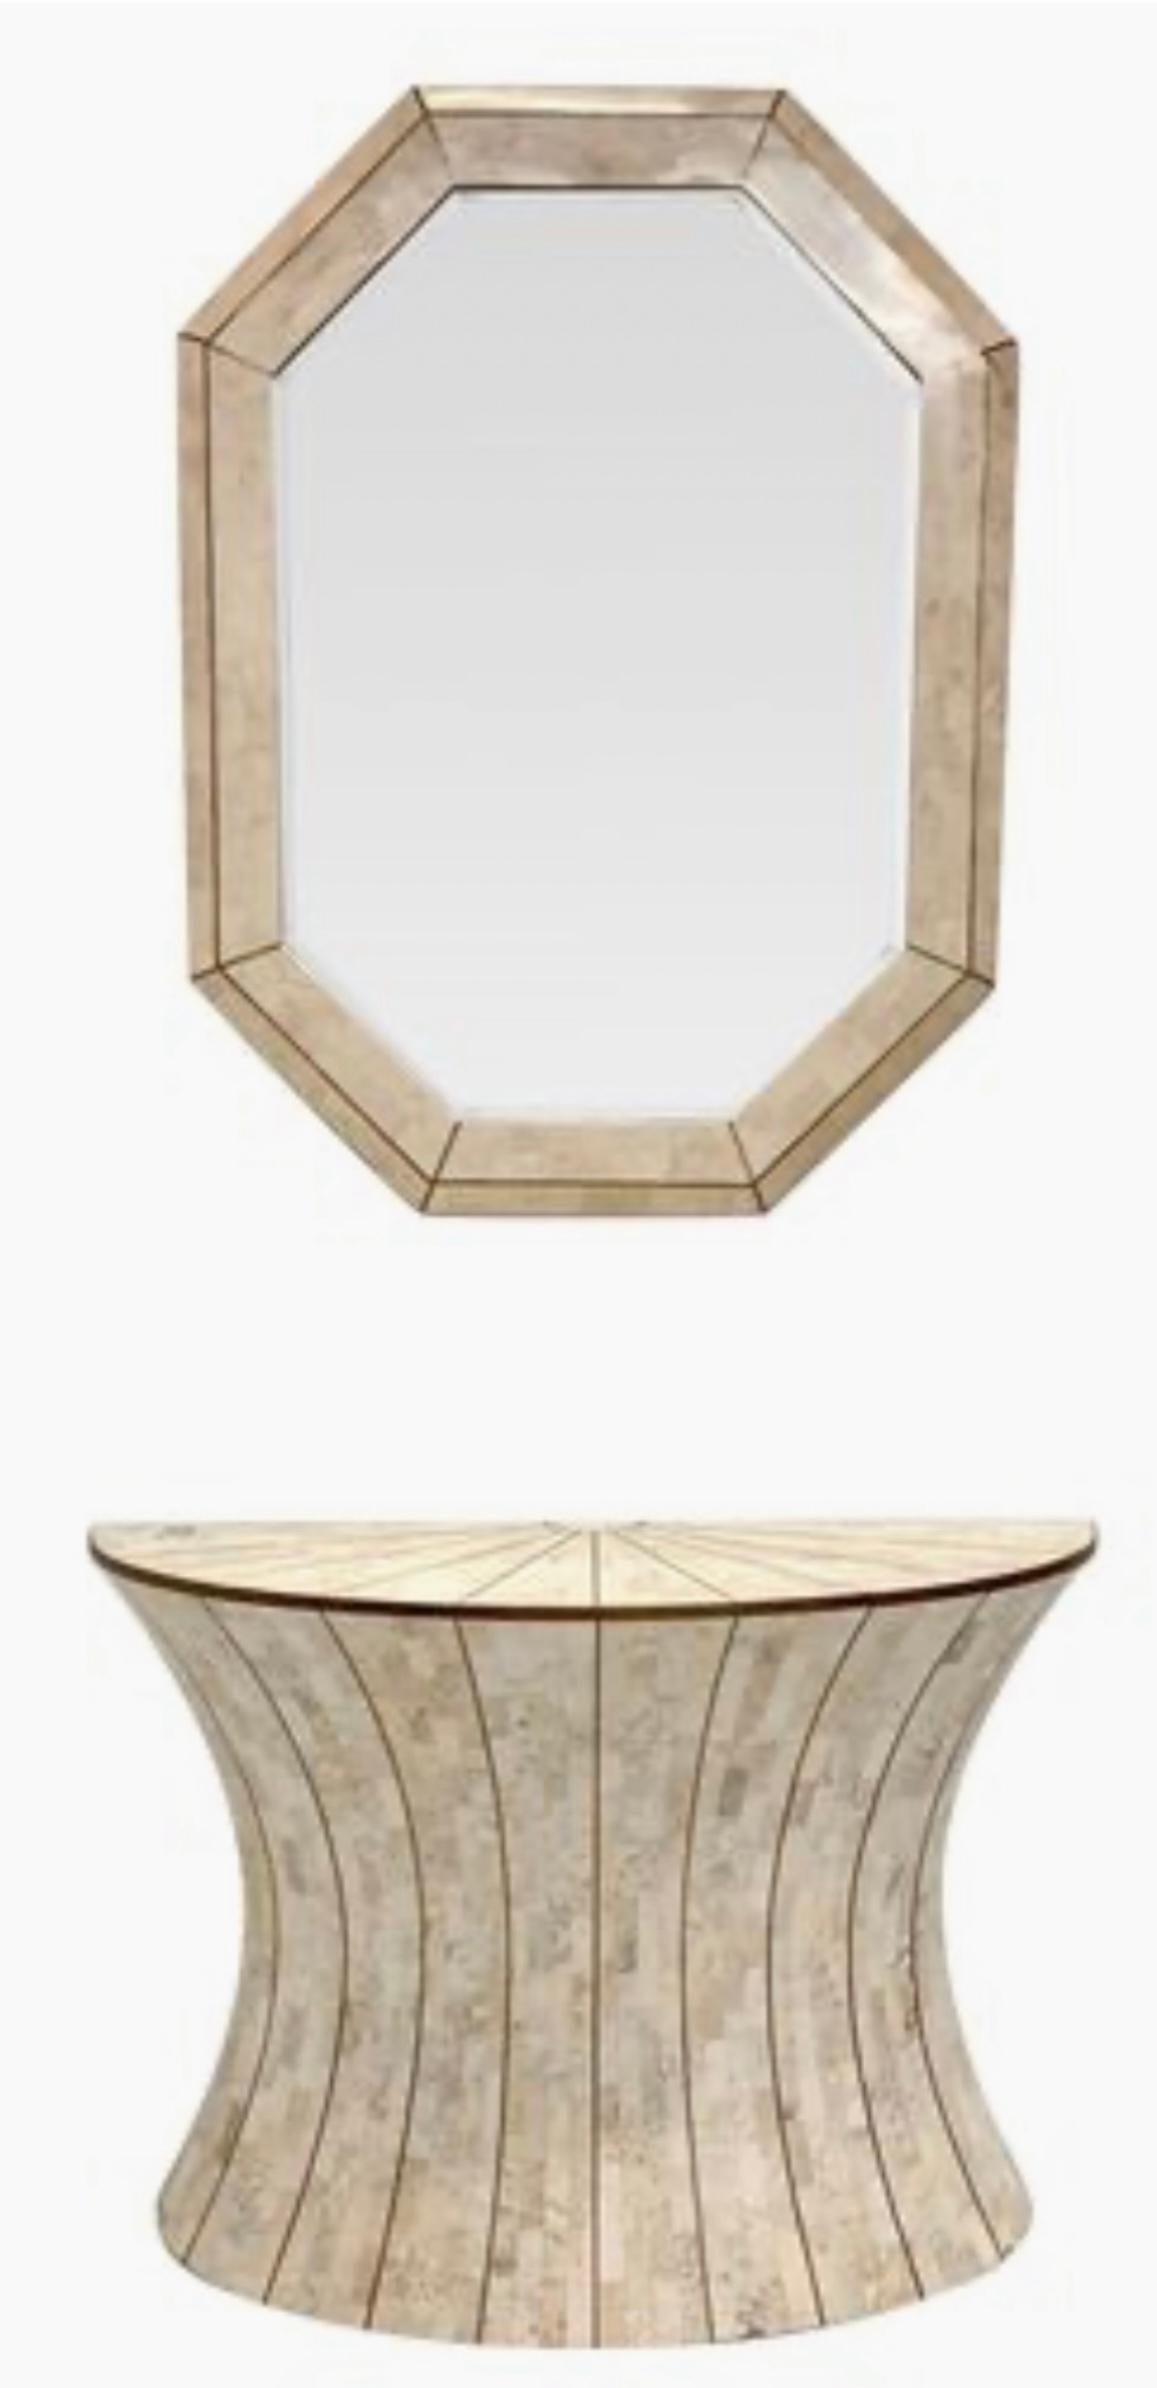 Late 20th Century Maitland -Smith Organic Modern Tessellated Travertine & Brass Console Table  For Sale